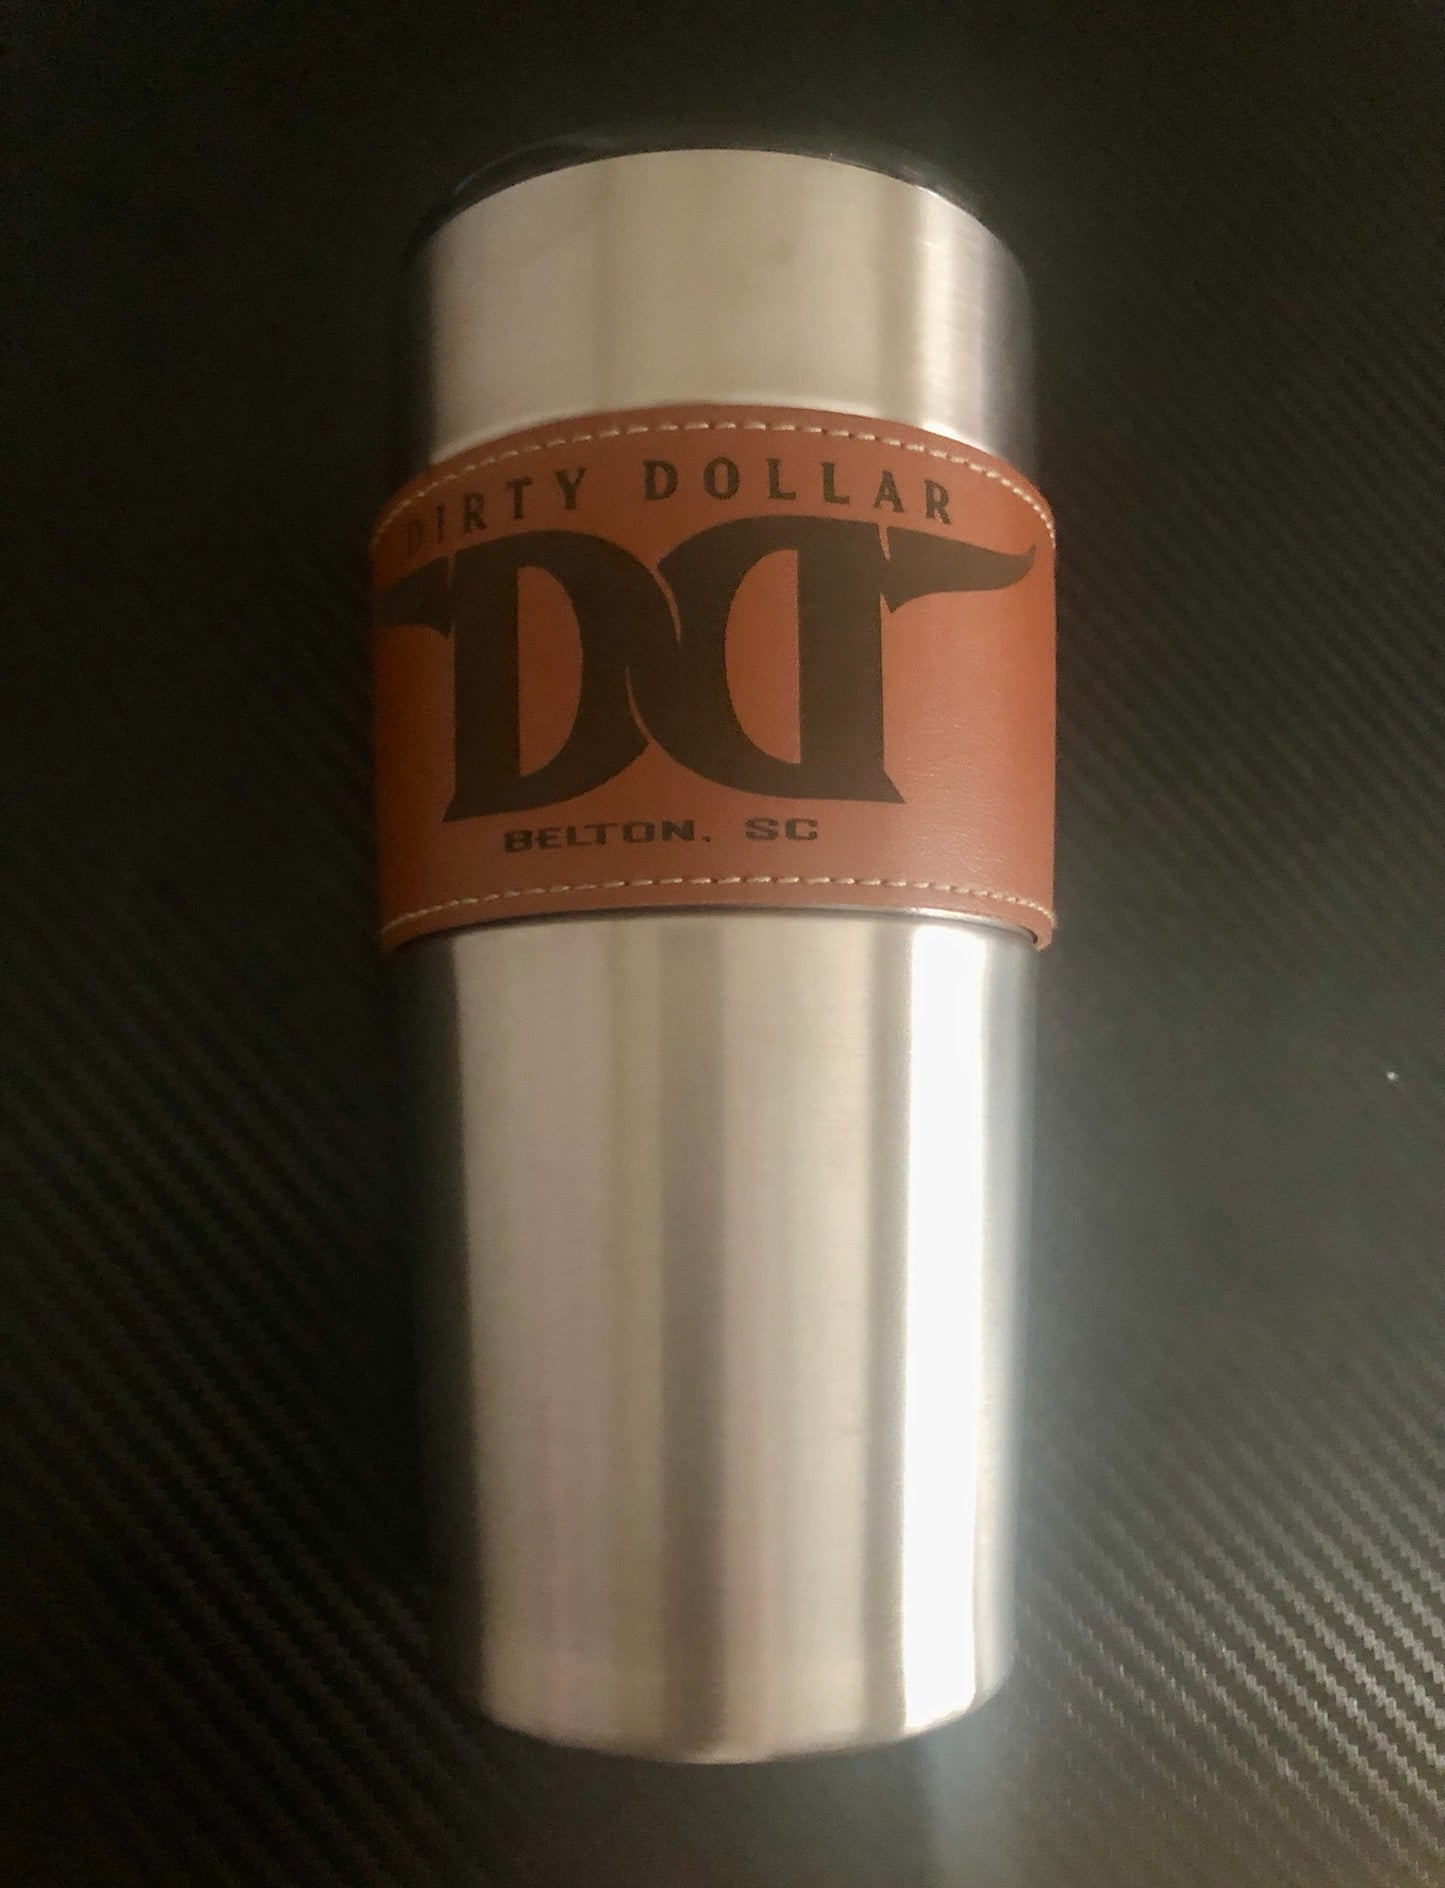 M2306 - 20 oz. Slim Thermal Cup with Dirty Dollar Logo on Leather Sleeve